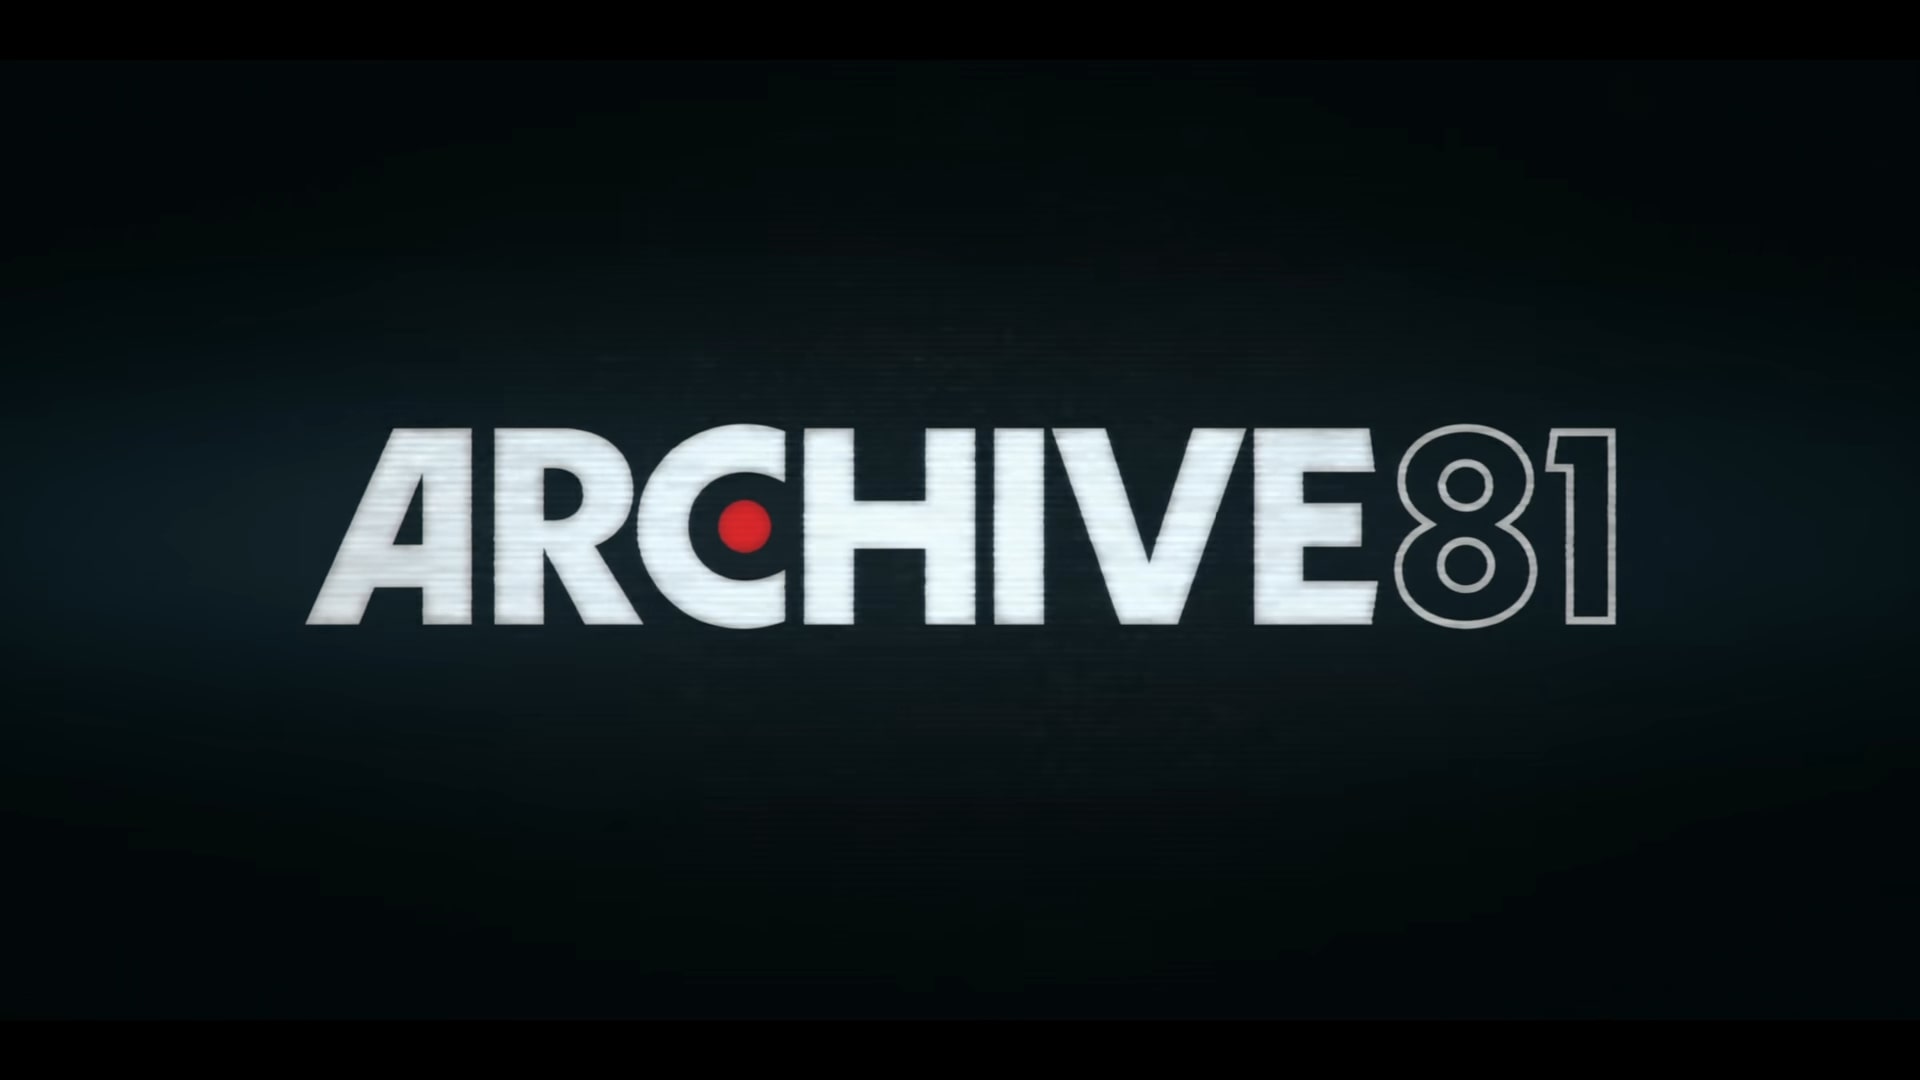 Archive 81 Trailer, Coming to Netflix in January 2022